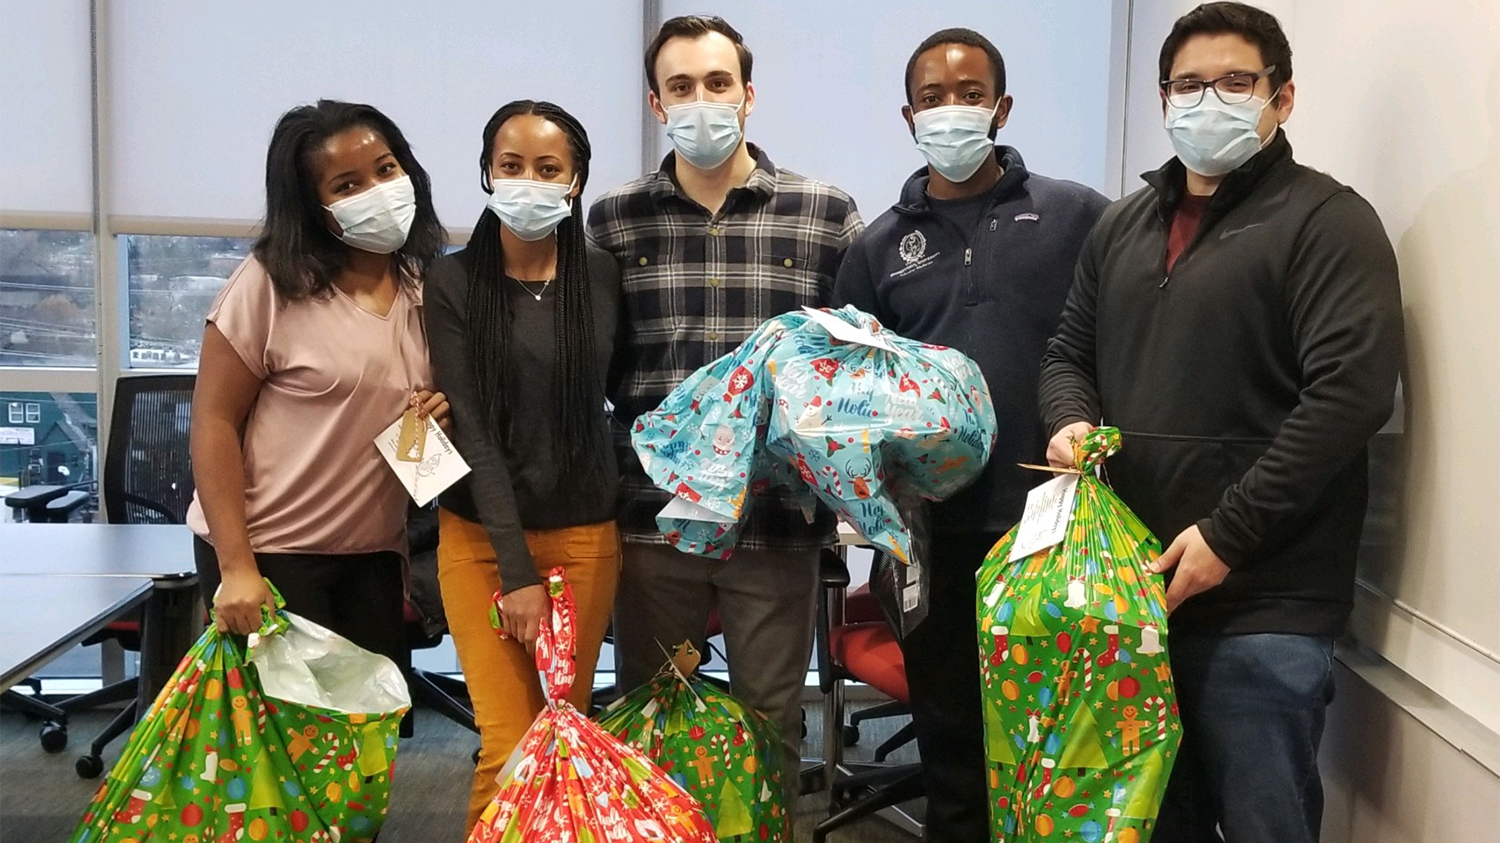 A group of students hold festive holiday bags filled with donated toys